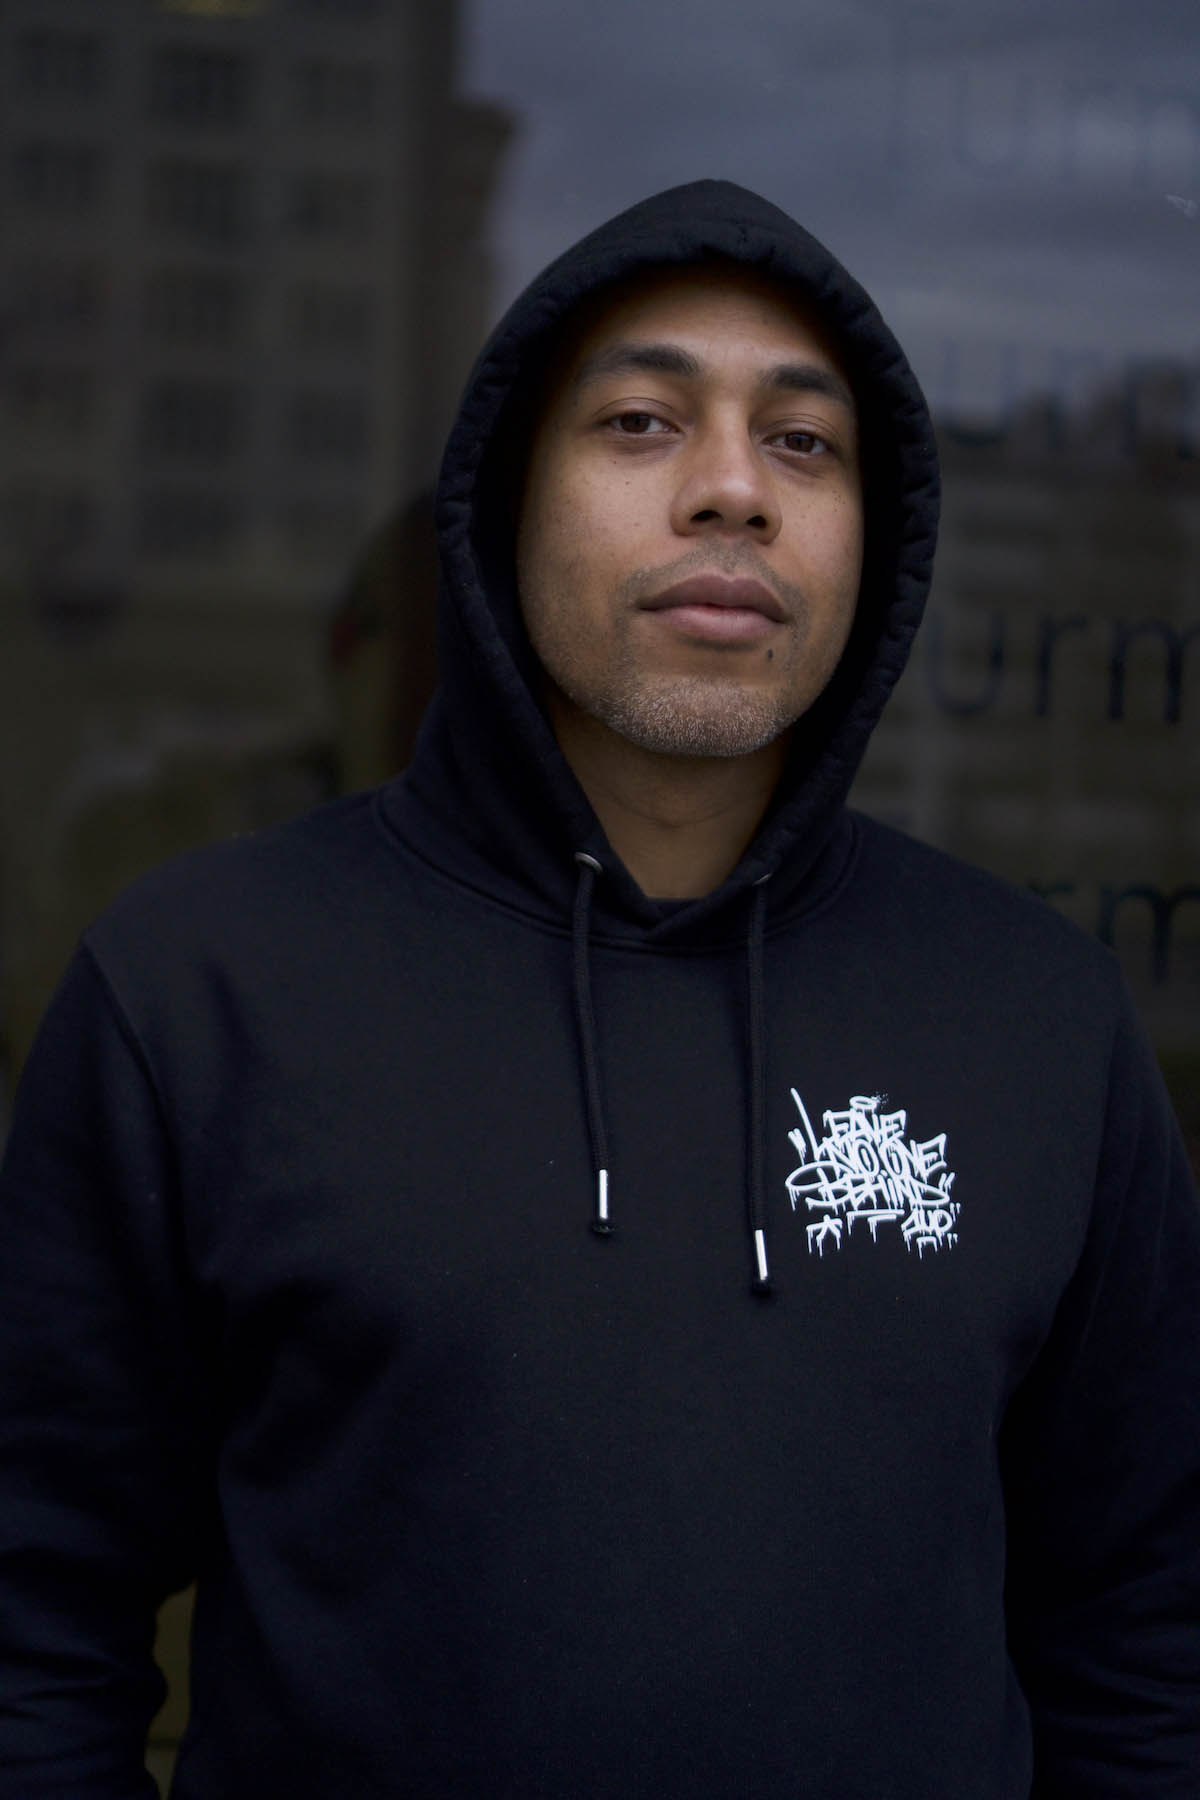 Black male person wearing a black hooded sweatshirt with the hood on his head looks at the camera.